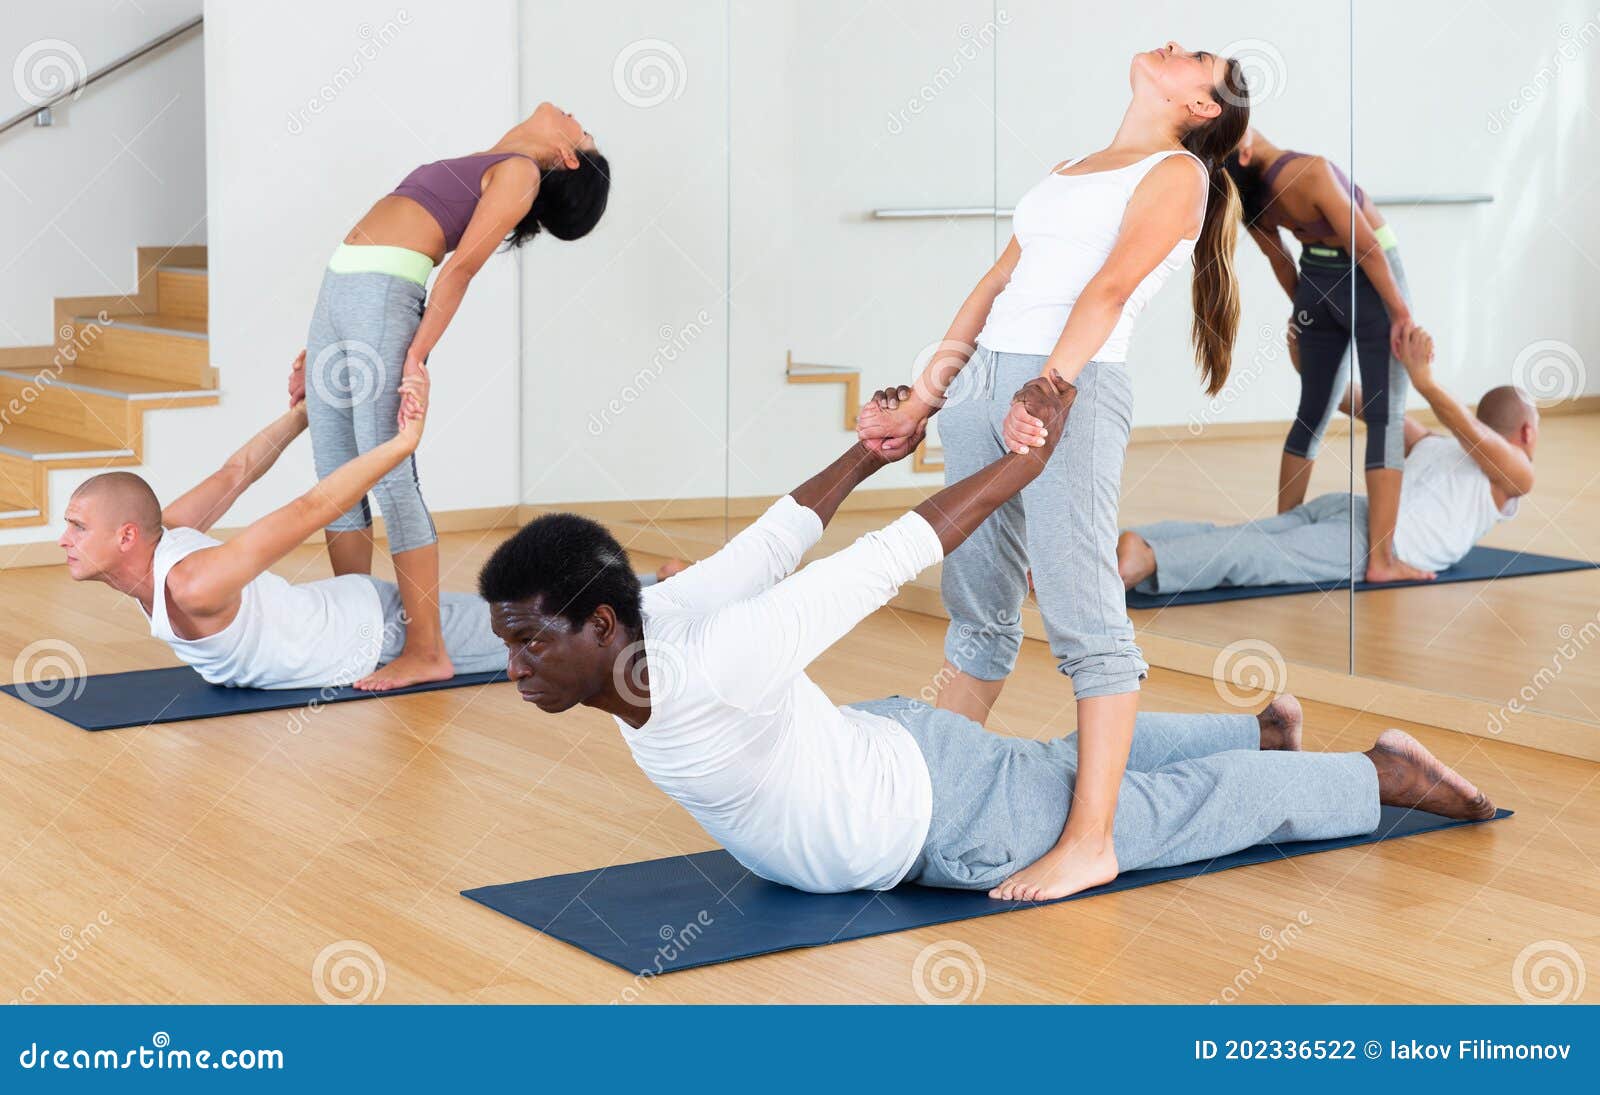 Corporate + Group Yoga | The Power of Yoga